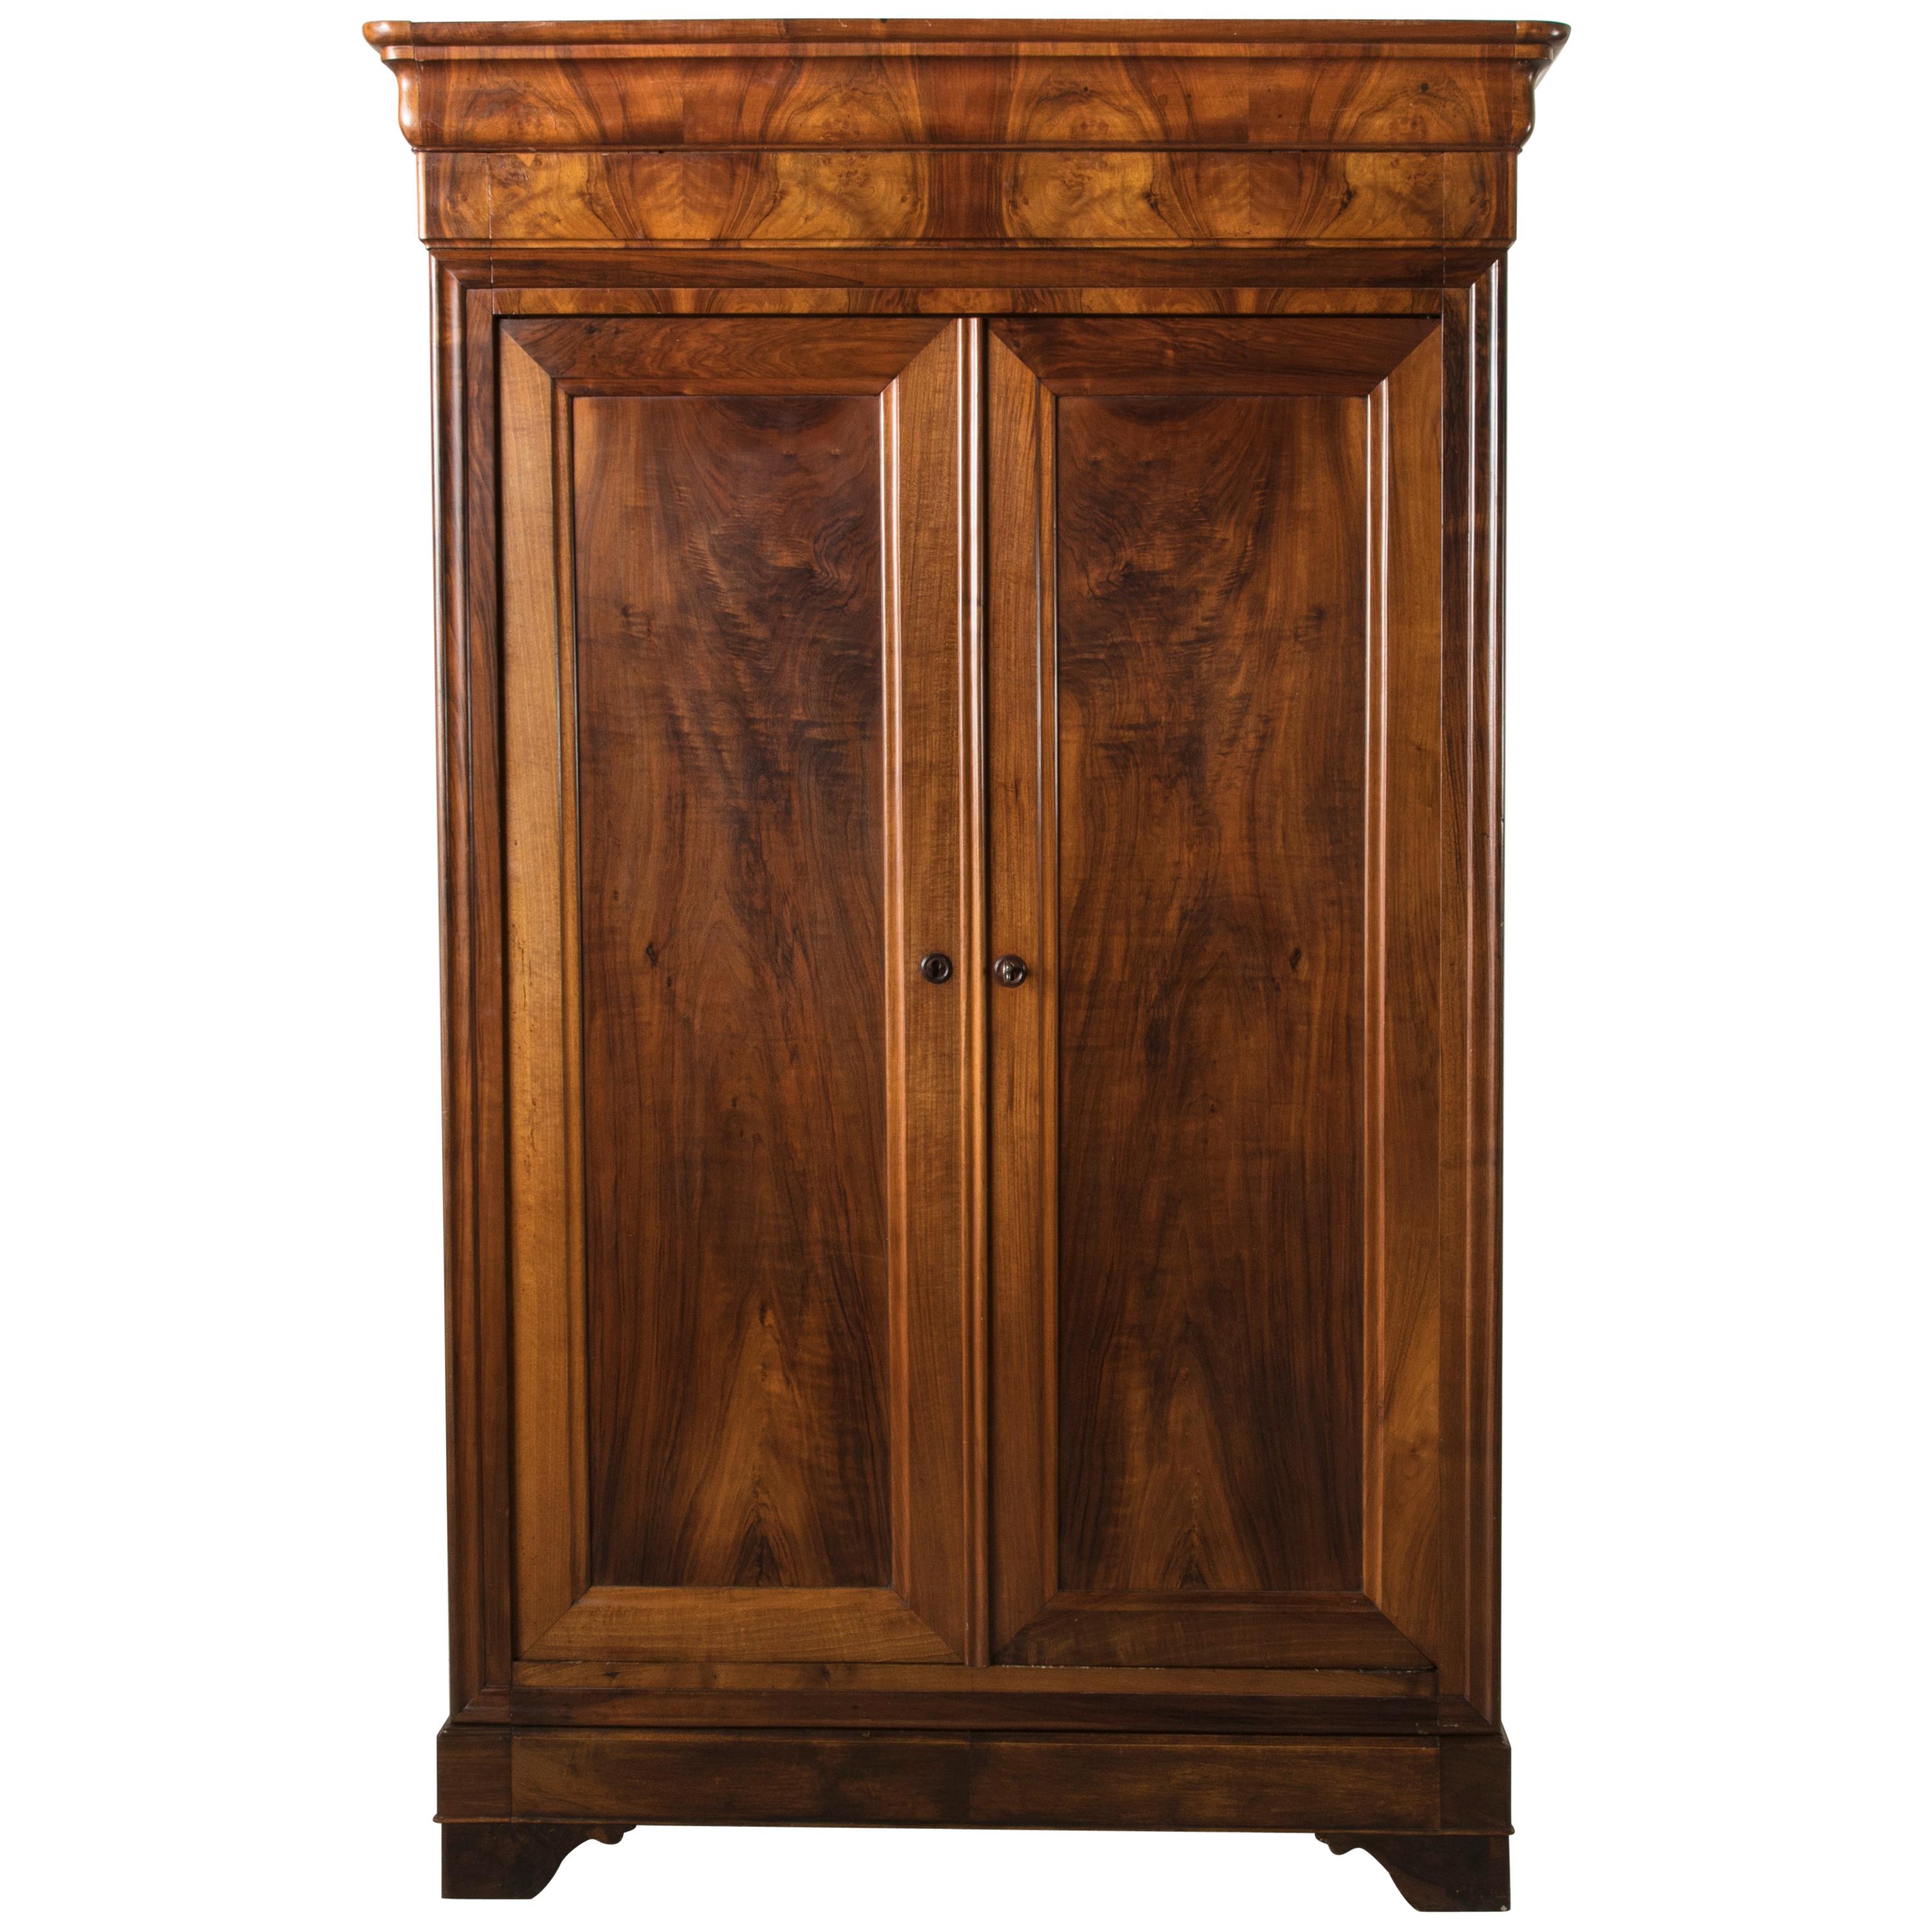 19th Century French Louis Philippe Period Bookmatched Walnut Armoire